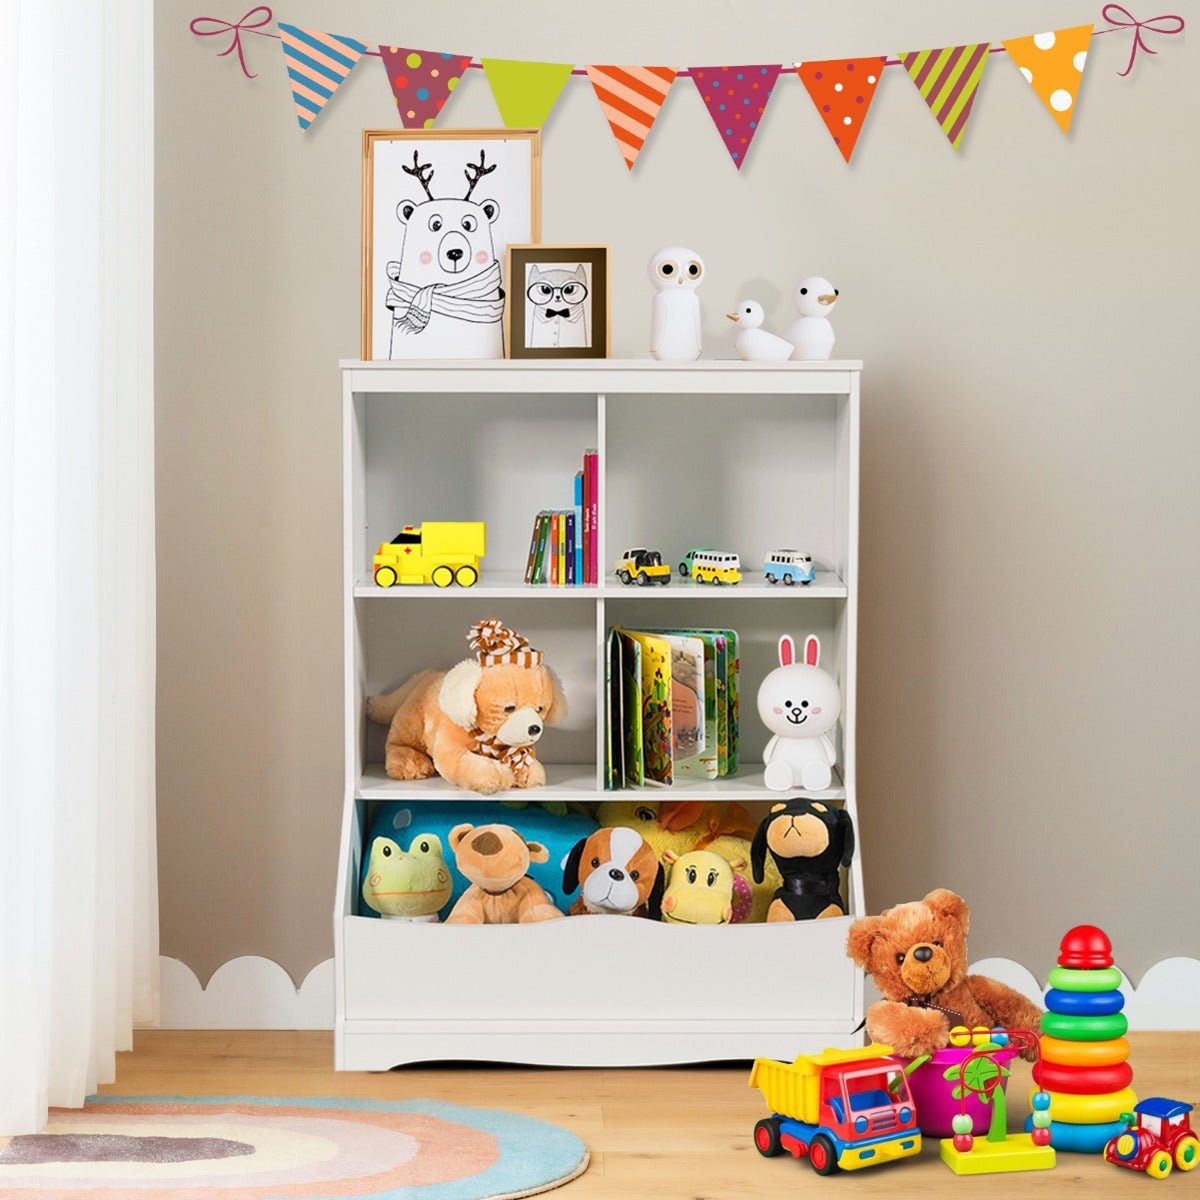 Discover Imagination: White 3-Tier Kids Wooden Bookshelf with Storage